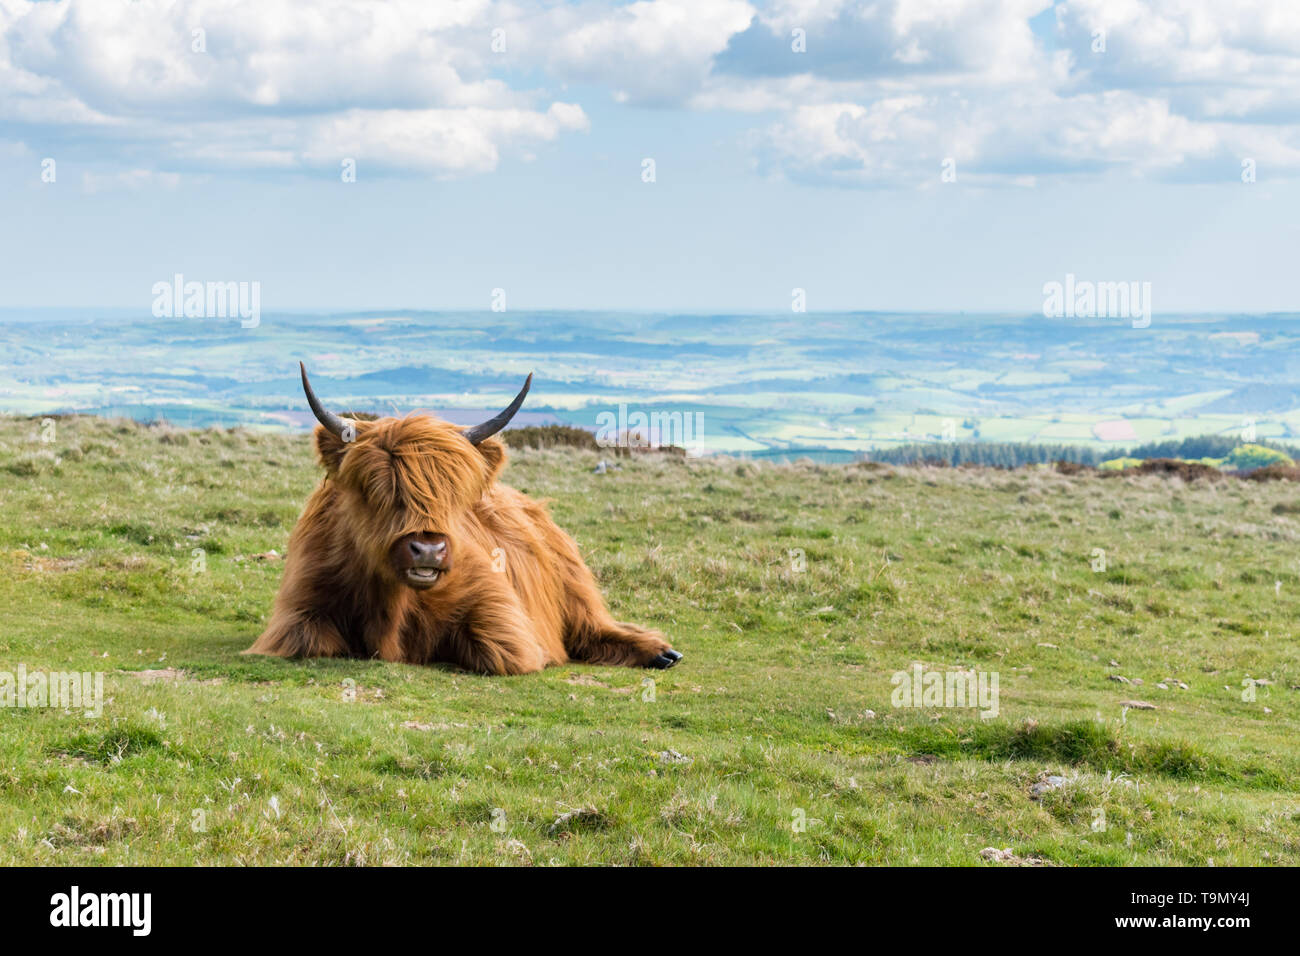 A single Highland Cattle sitting on grass on the top of a hill in Dartmoor National Park, Devon, UK. Teignbridge District is in the background. Stock Photo